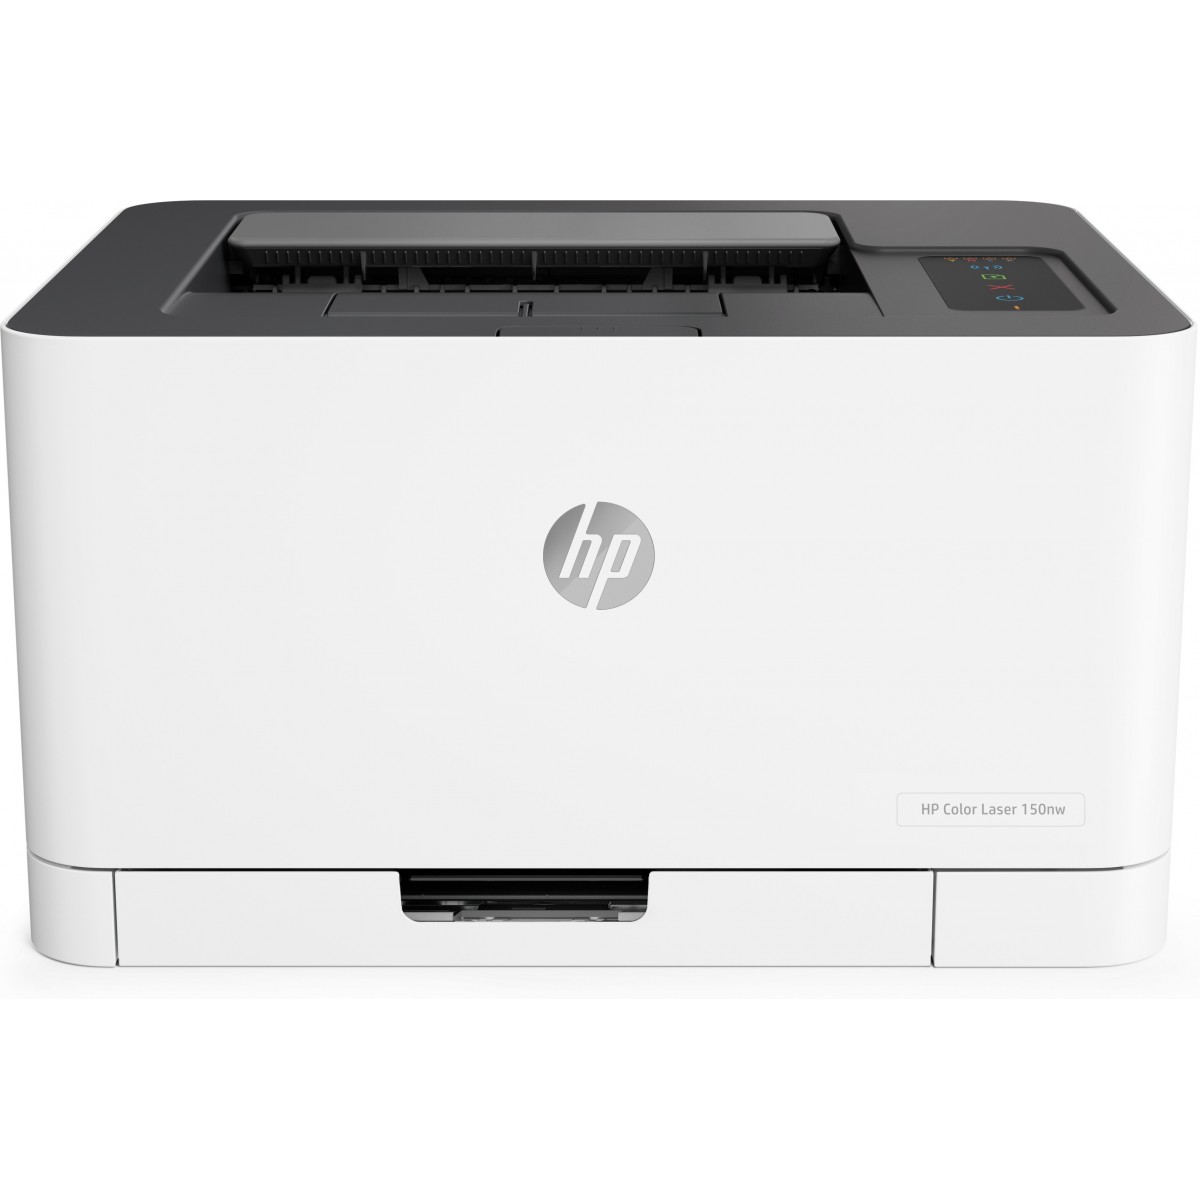 HP Color Laser 150nw - Laser - Colour - 600 x 600 DPI - A4 - 18 ppm - Network ready